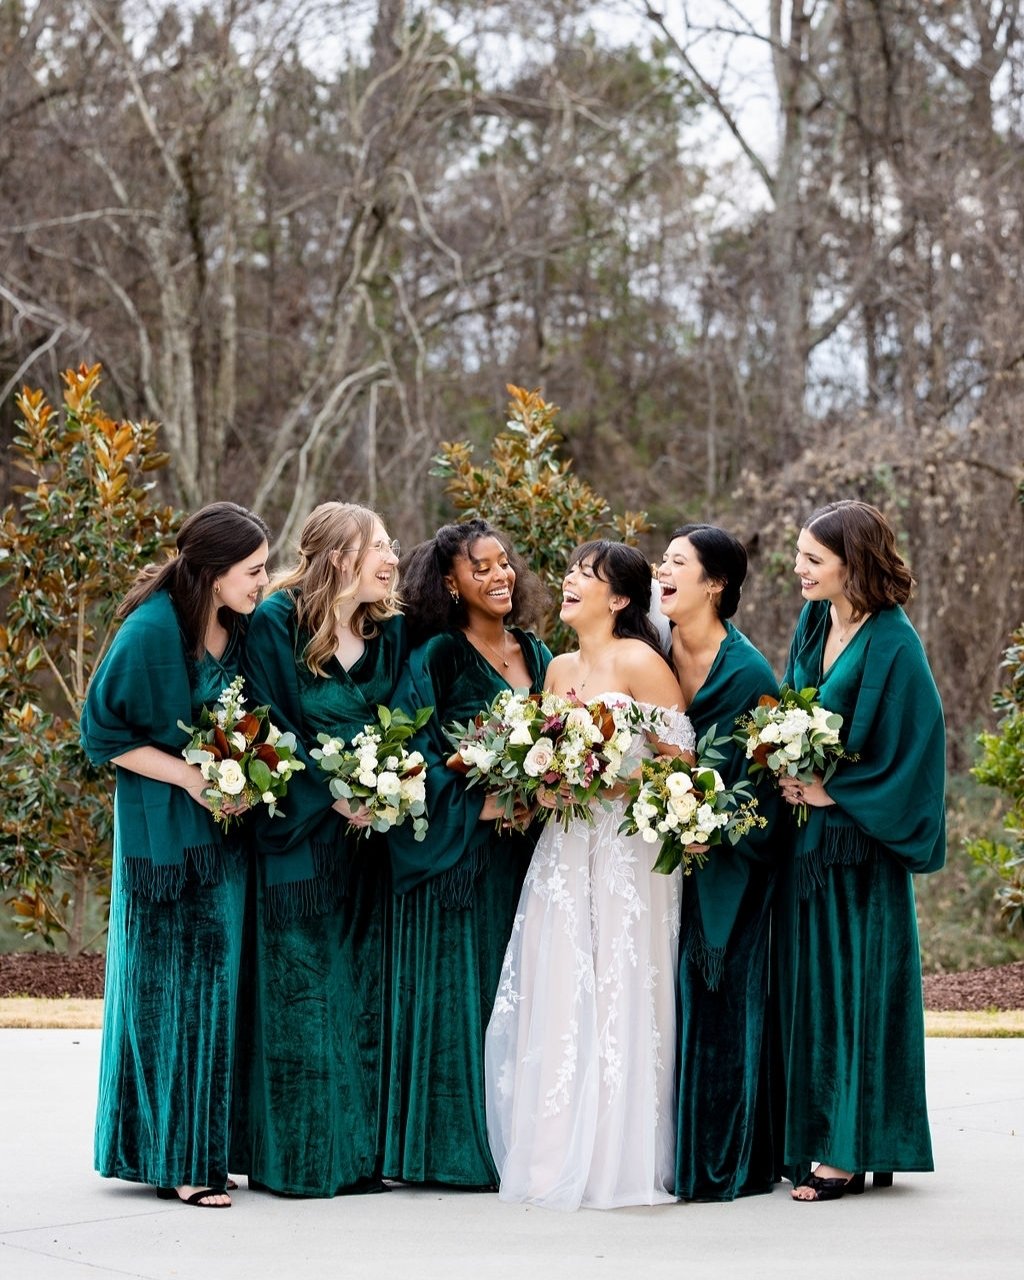 Behind every beautiful bride is an extraordinary group of bridesmaids. Cheers to Jane and her fabulous squad! 🌟

Photography // @timmesterphotography 
Venue // @themaxwellraleigh⁠ 
Planner // @magnoliacollective.co⁠ 
Florals // @teacupfloral⁠ 
Hair 